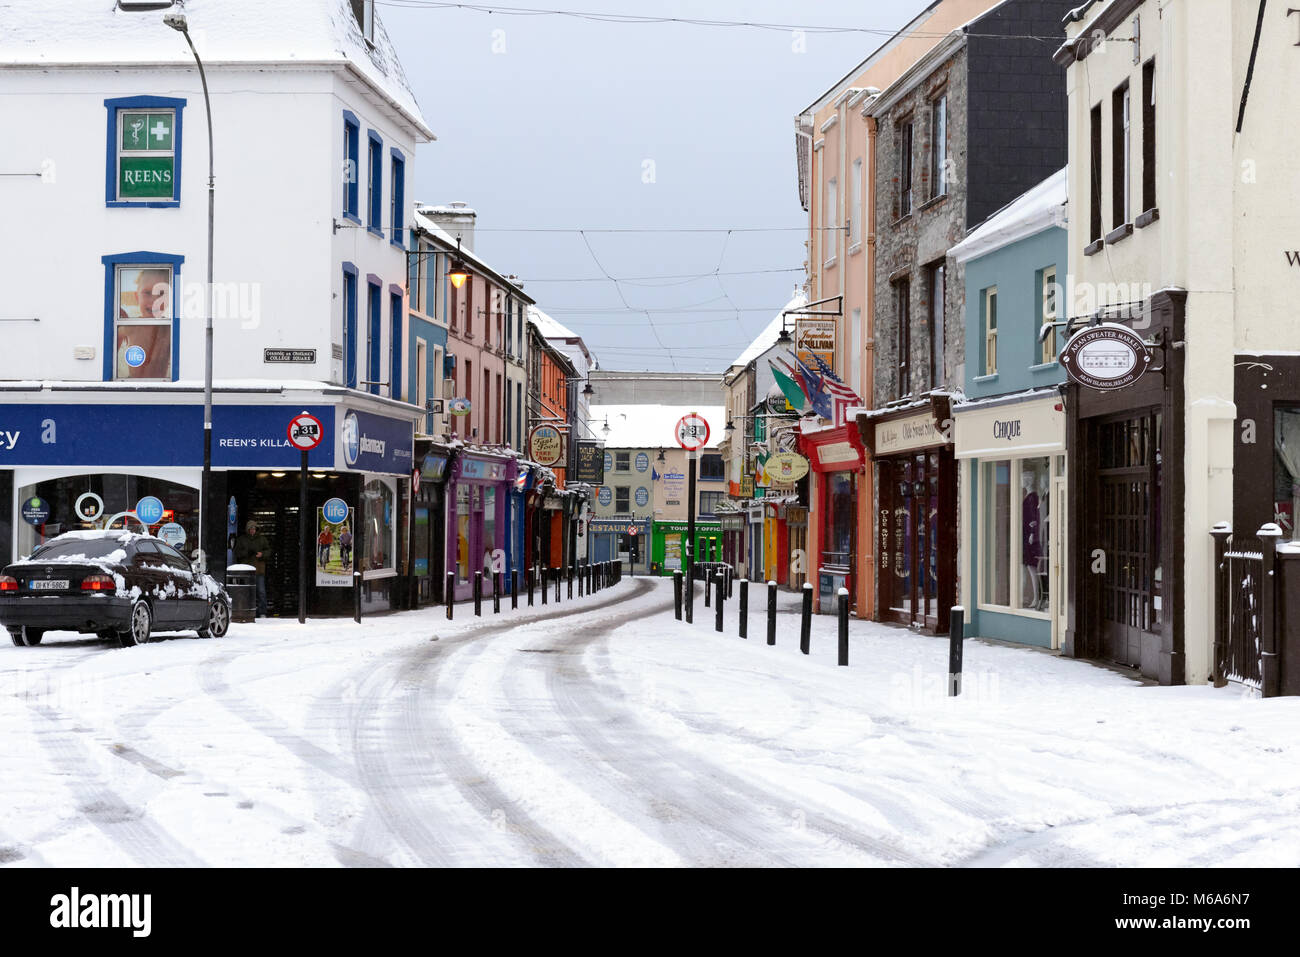 Ireland weather. Cold and snow in Killarney, County Kerry, Ireland since the town has been hit by 'The beast from the East' storm Emma. Stock Photo